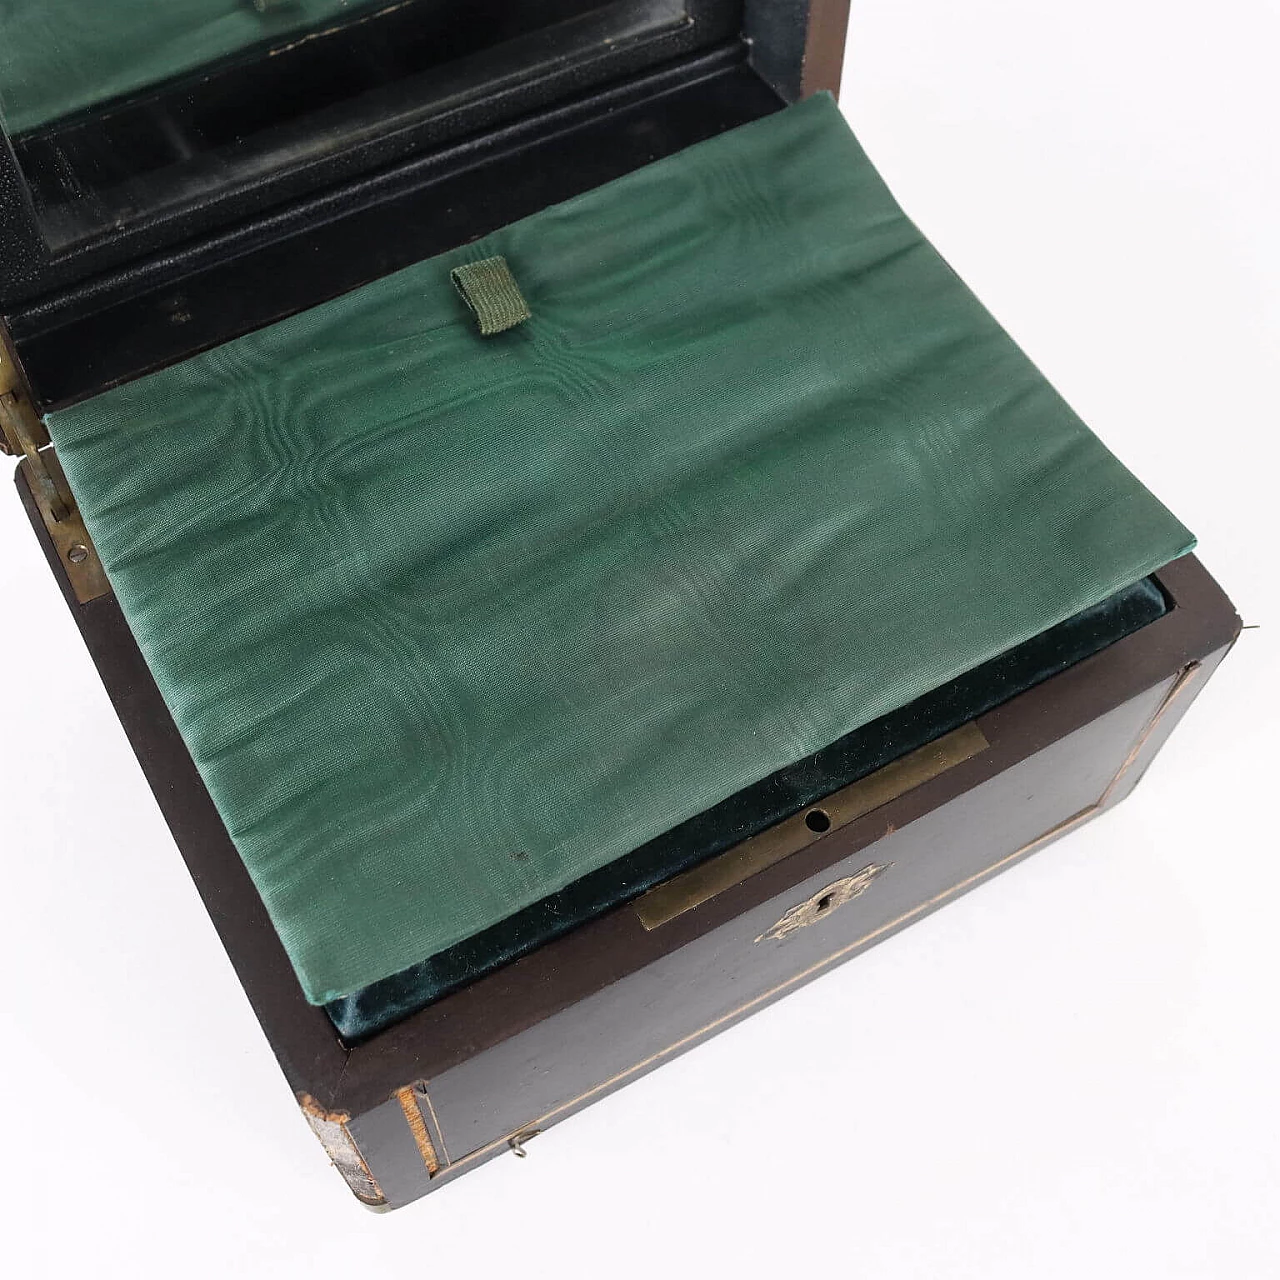 Ebony veneer sewing box with inlay and brass profiles, 19th century 15